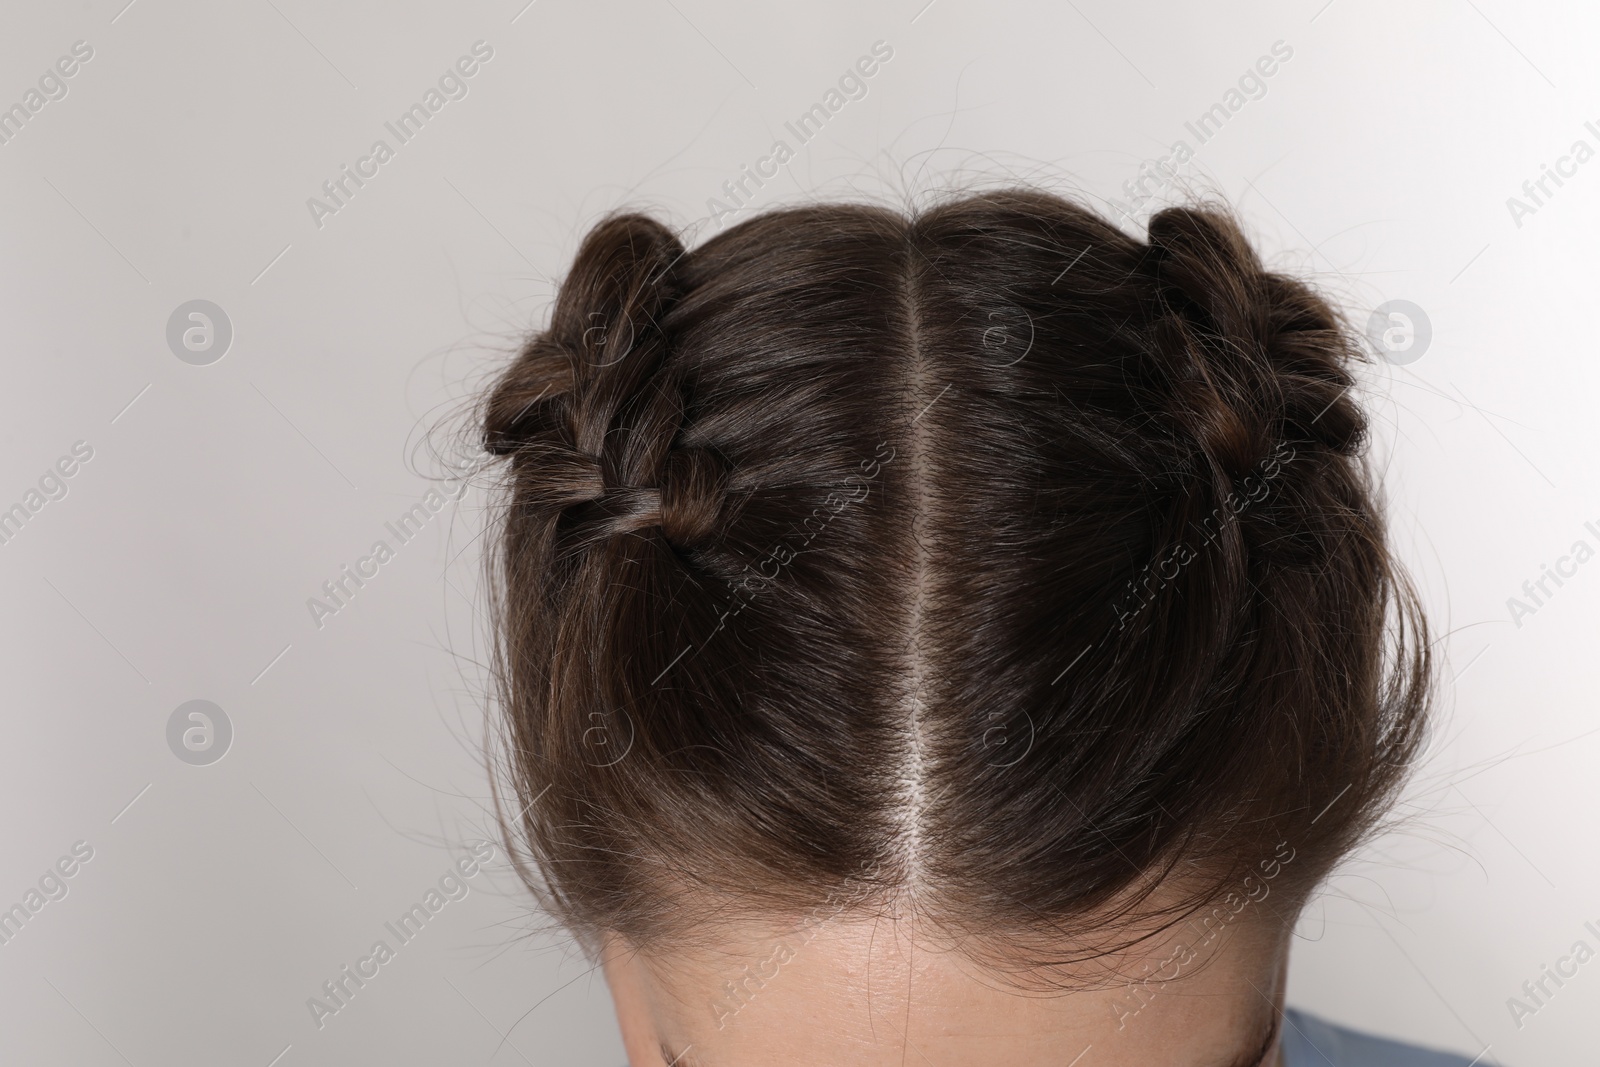 Photo of Woman with braided hair on light grey background, closeup